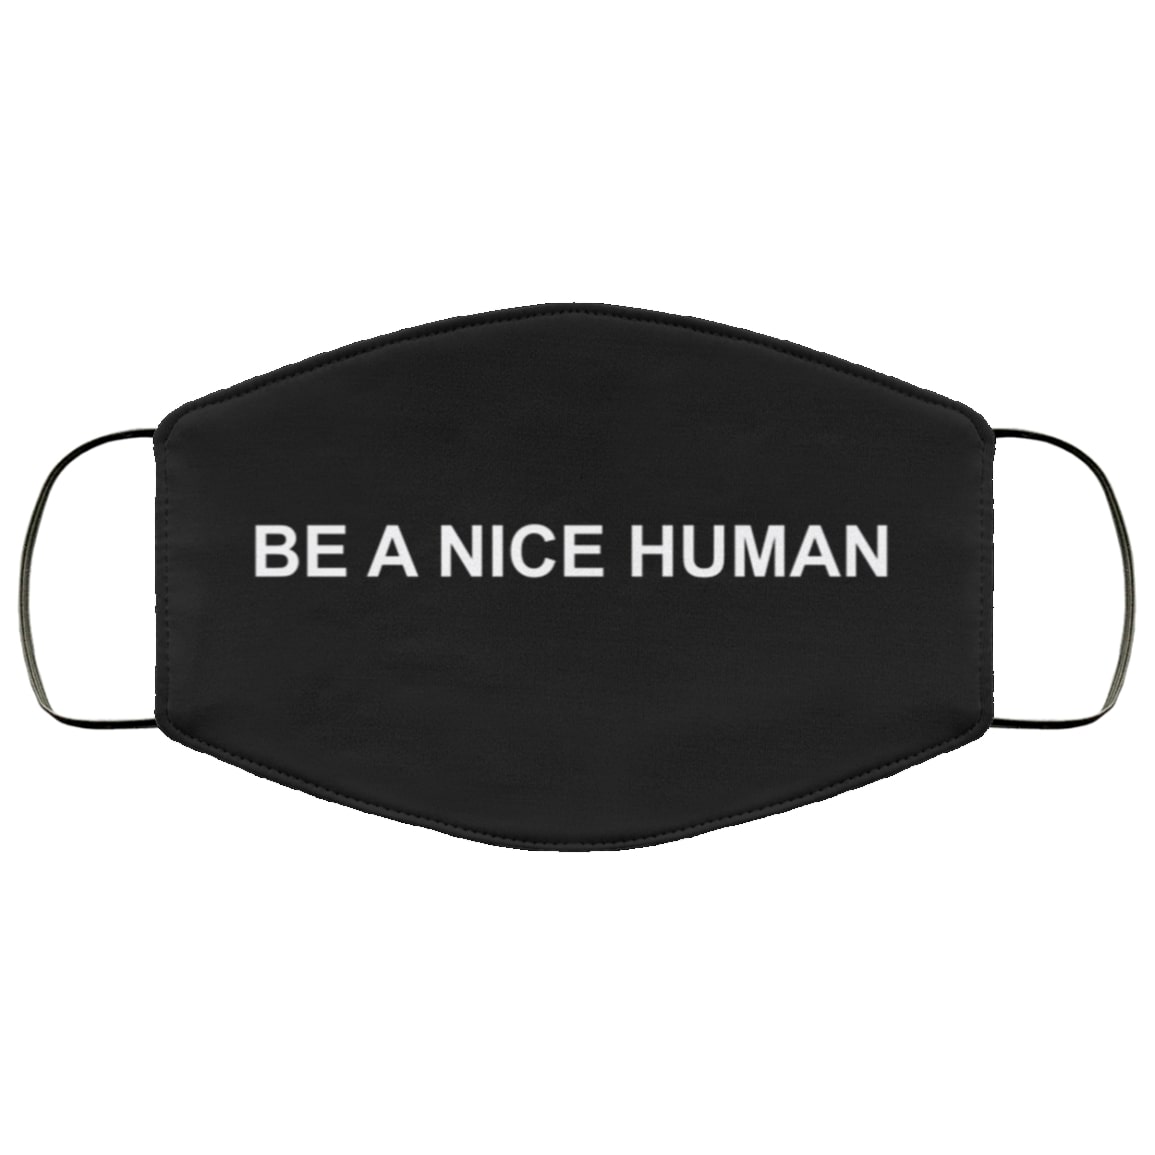 Be a nice human full over printed face mask 1